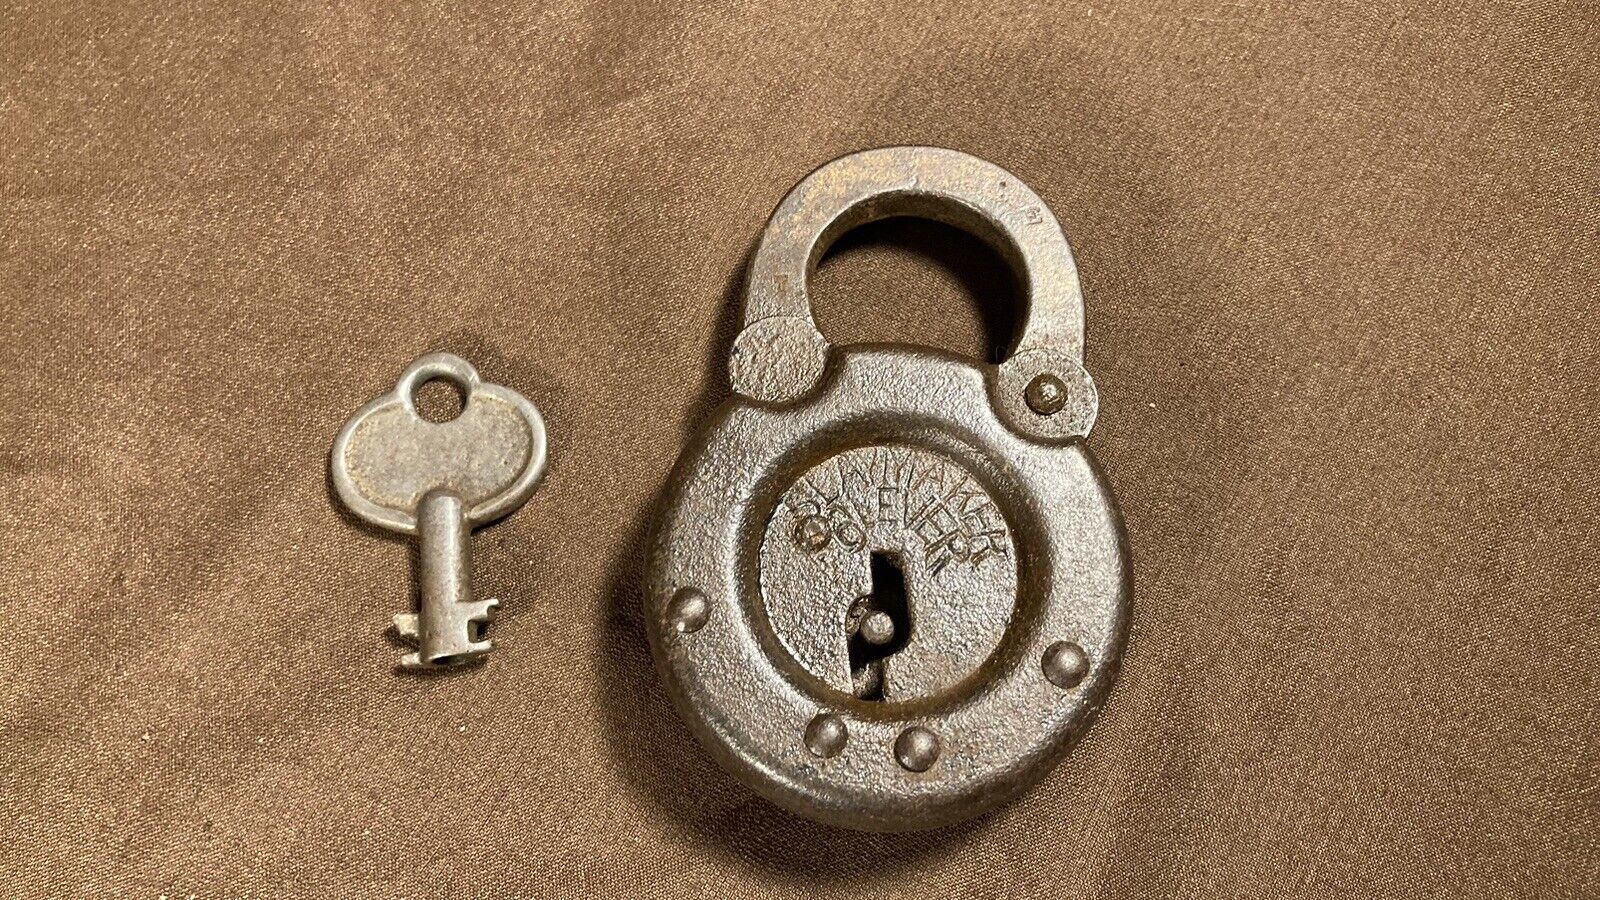 Antique Slaymaker Padlock Lock with Working Key Gate Shed Barn Hasp Lock